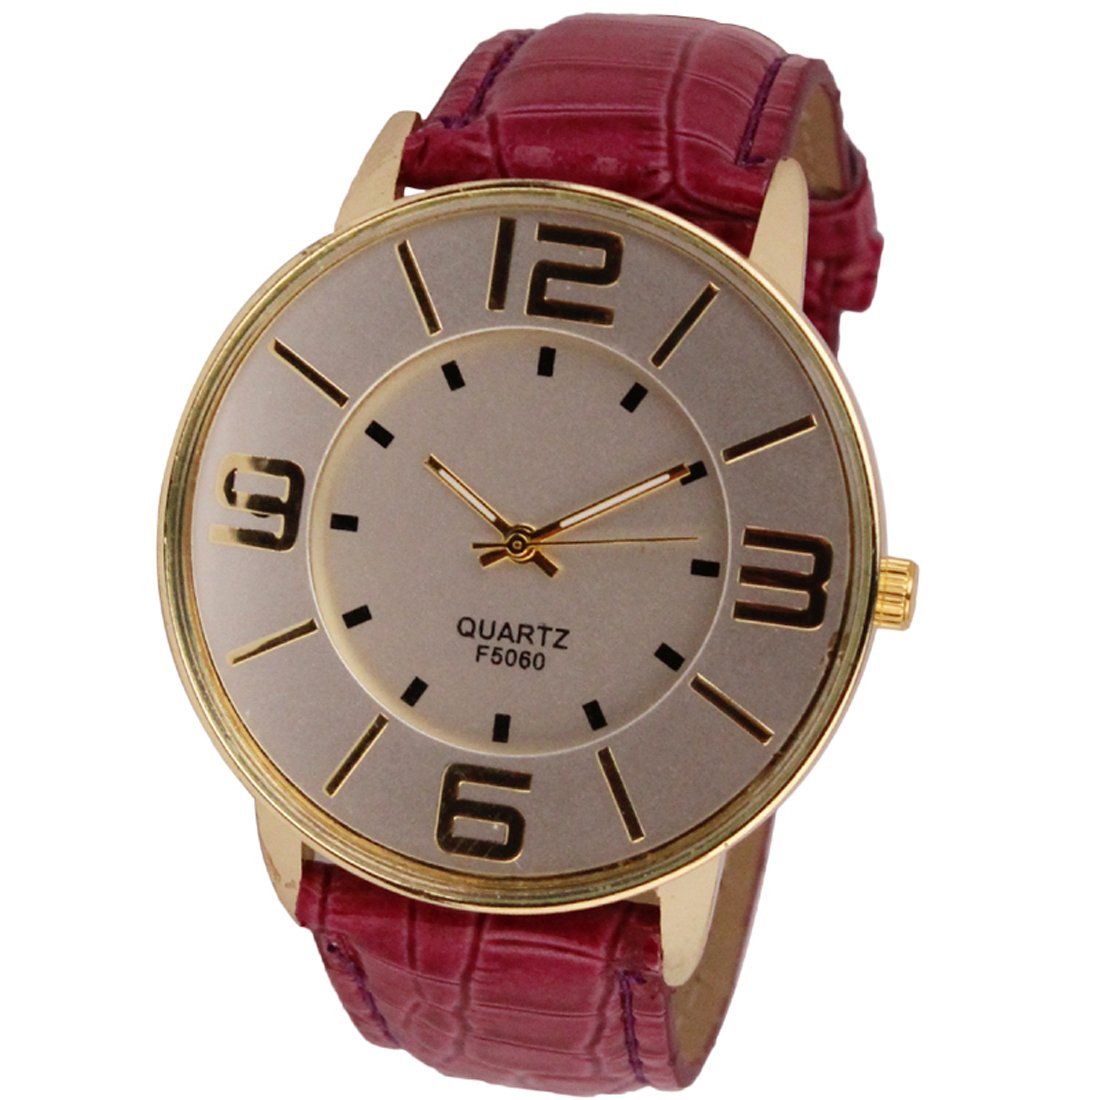 Meily(TM) Womens Numerals Gold Dial Leather Analog Quartz Watch - Click Image to Close